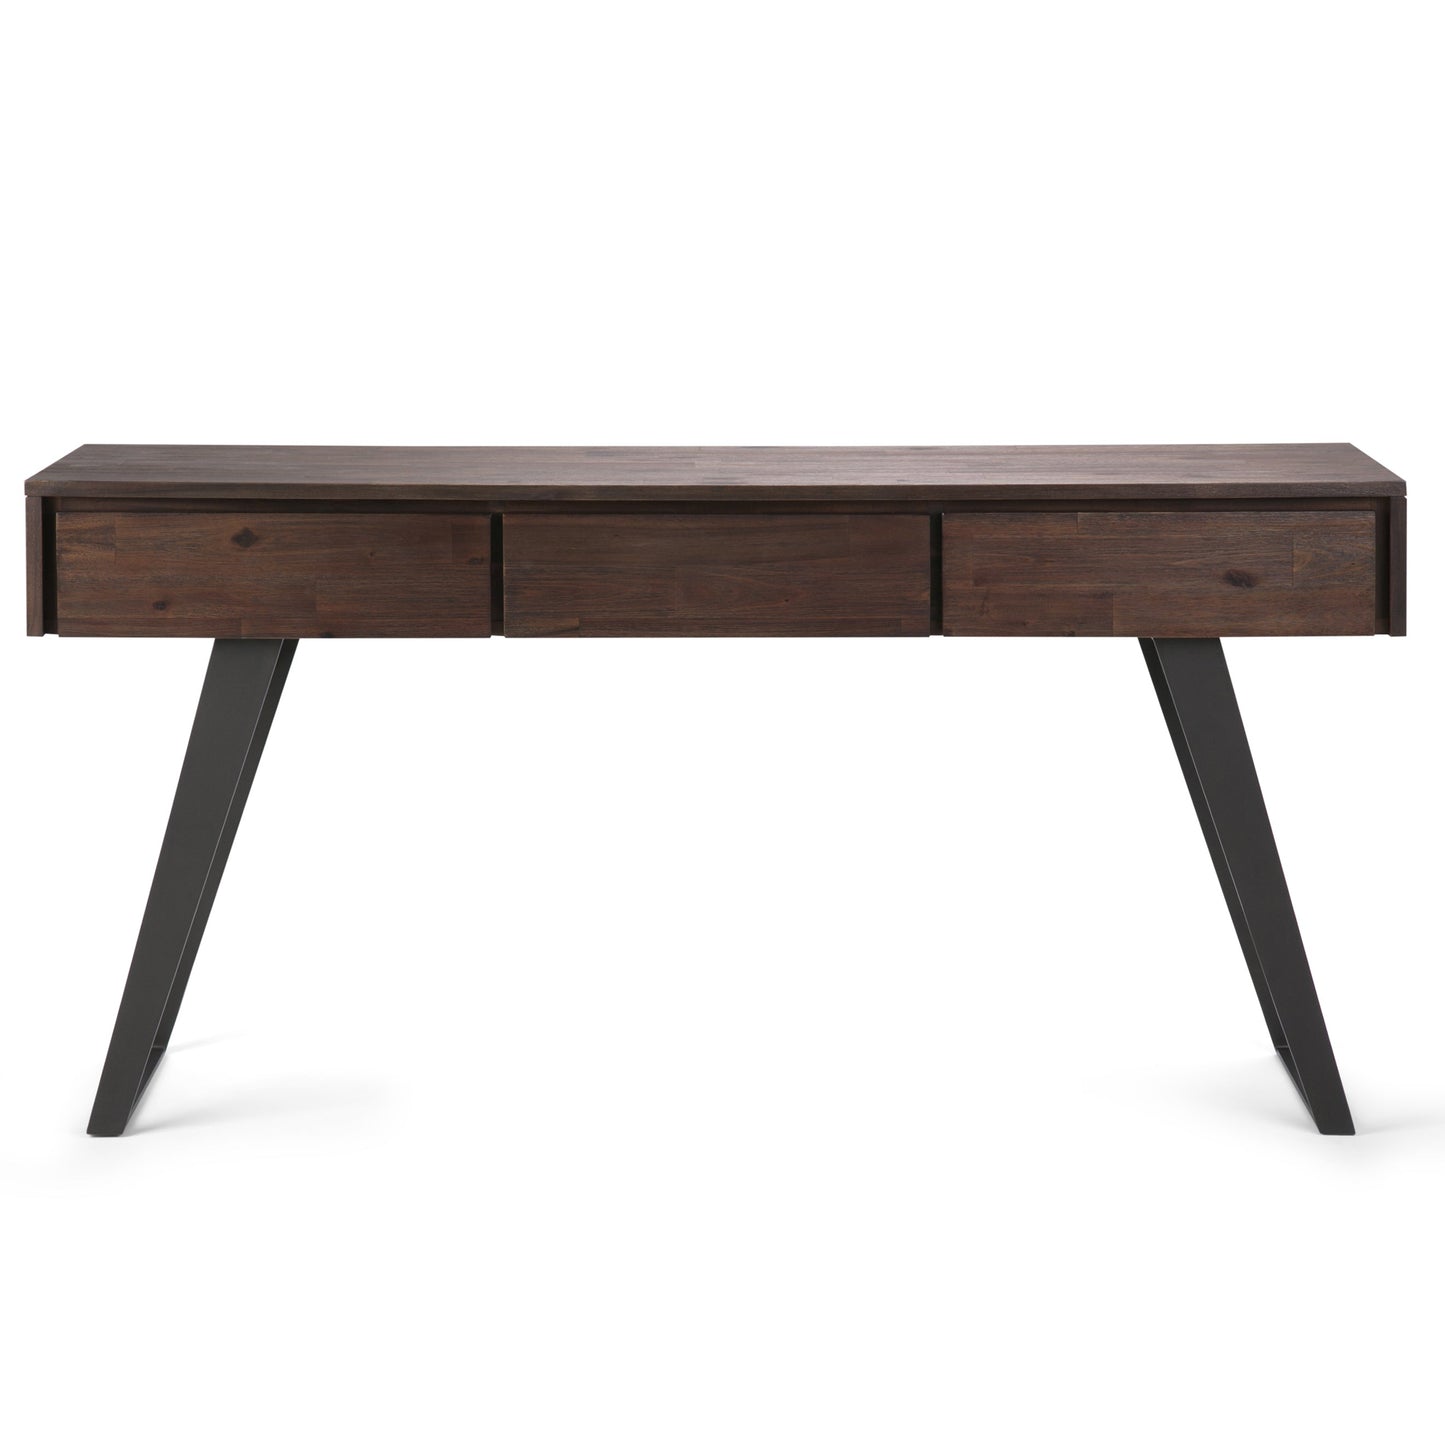 Lowry - Desk - Distressed Charcoal Brown